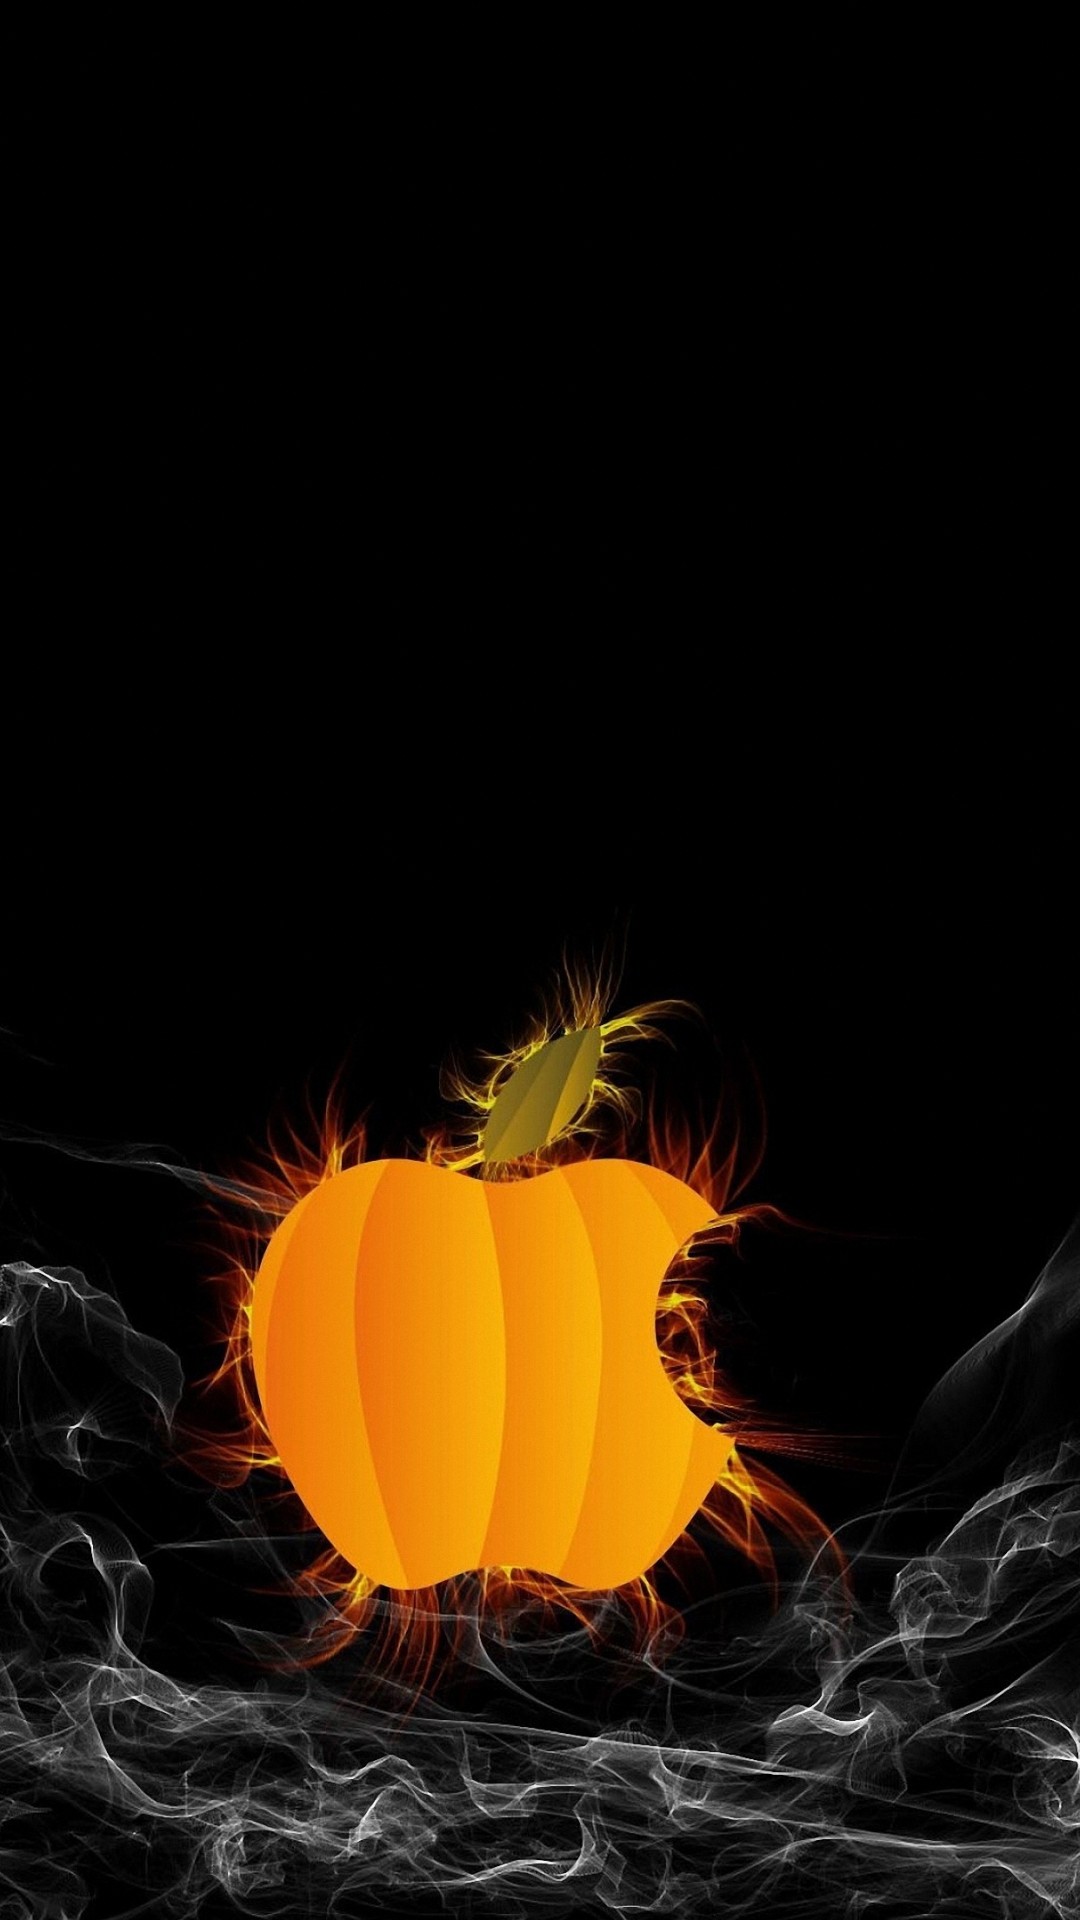 1080x1920 iPumpkin - Tap to see more creatively spooky Halloween wallpaper! | @mobile9